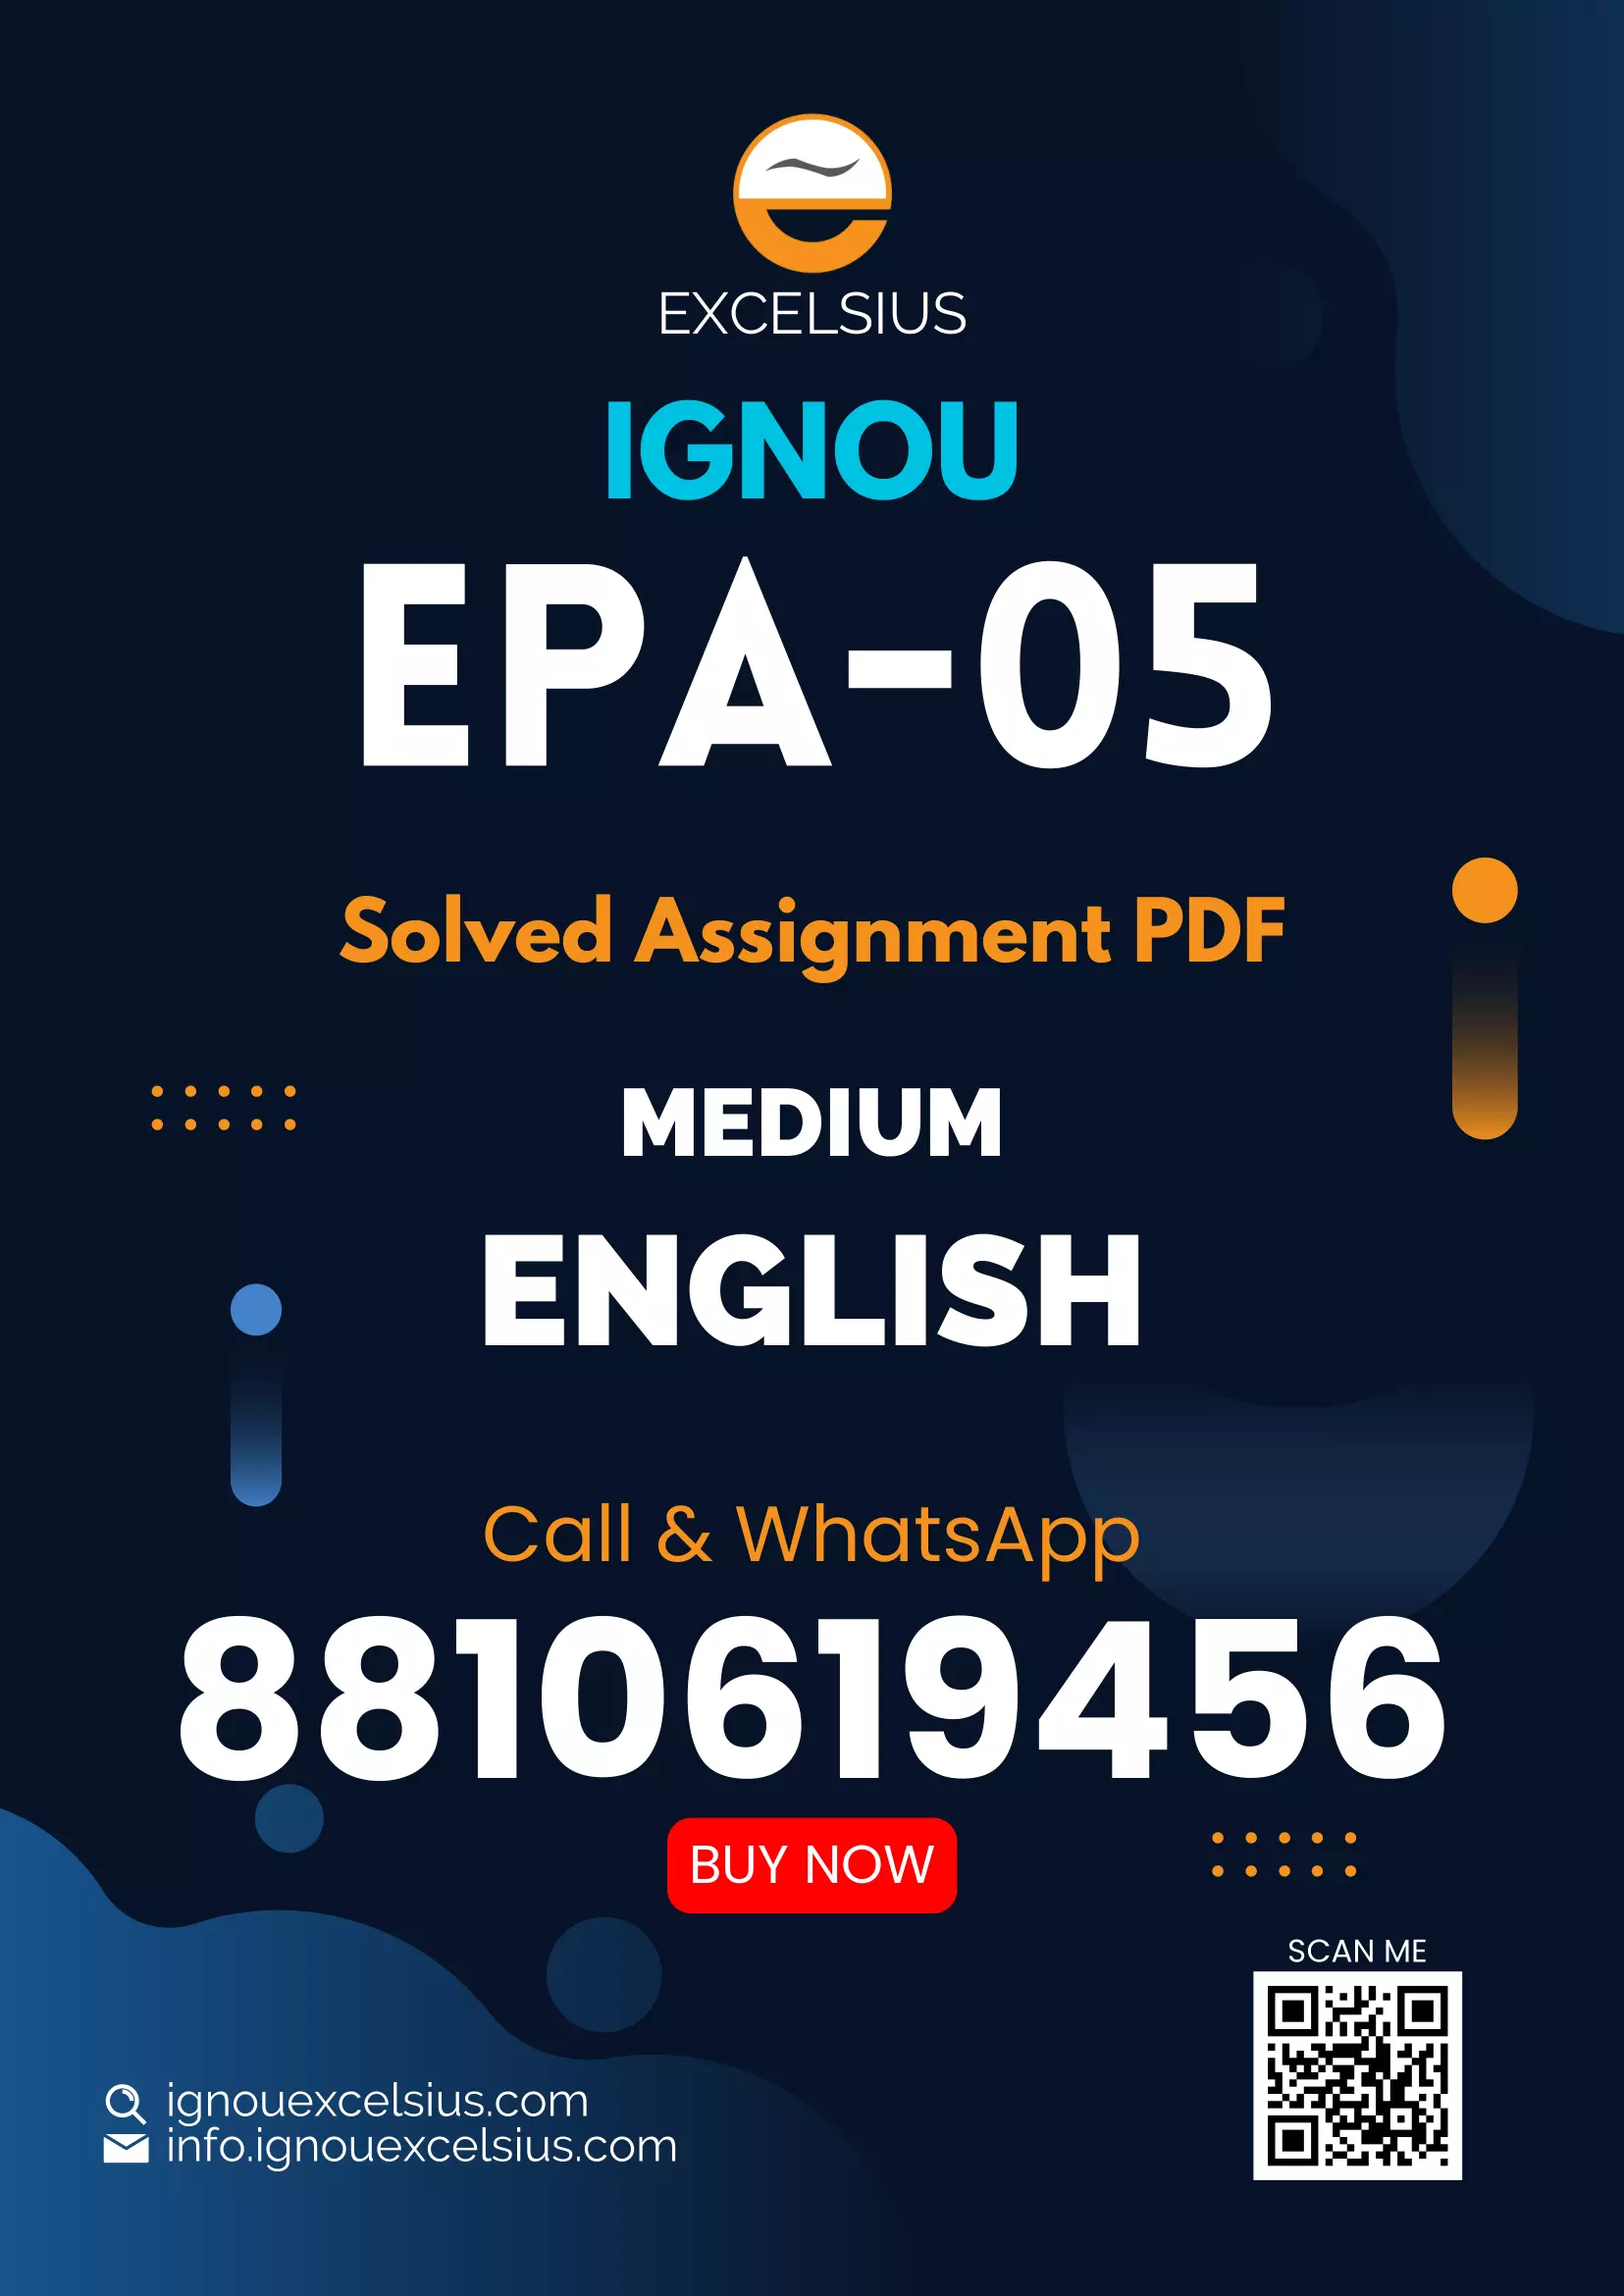 IGNOU EPA-05 - Financial Administration, Latest Solved Assignment-July 2022 - January 2023